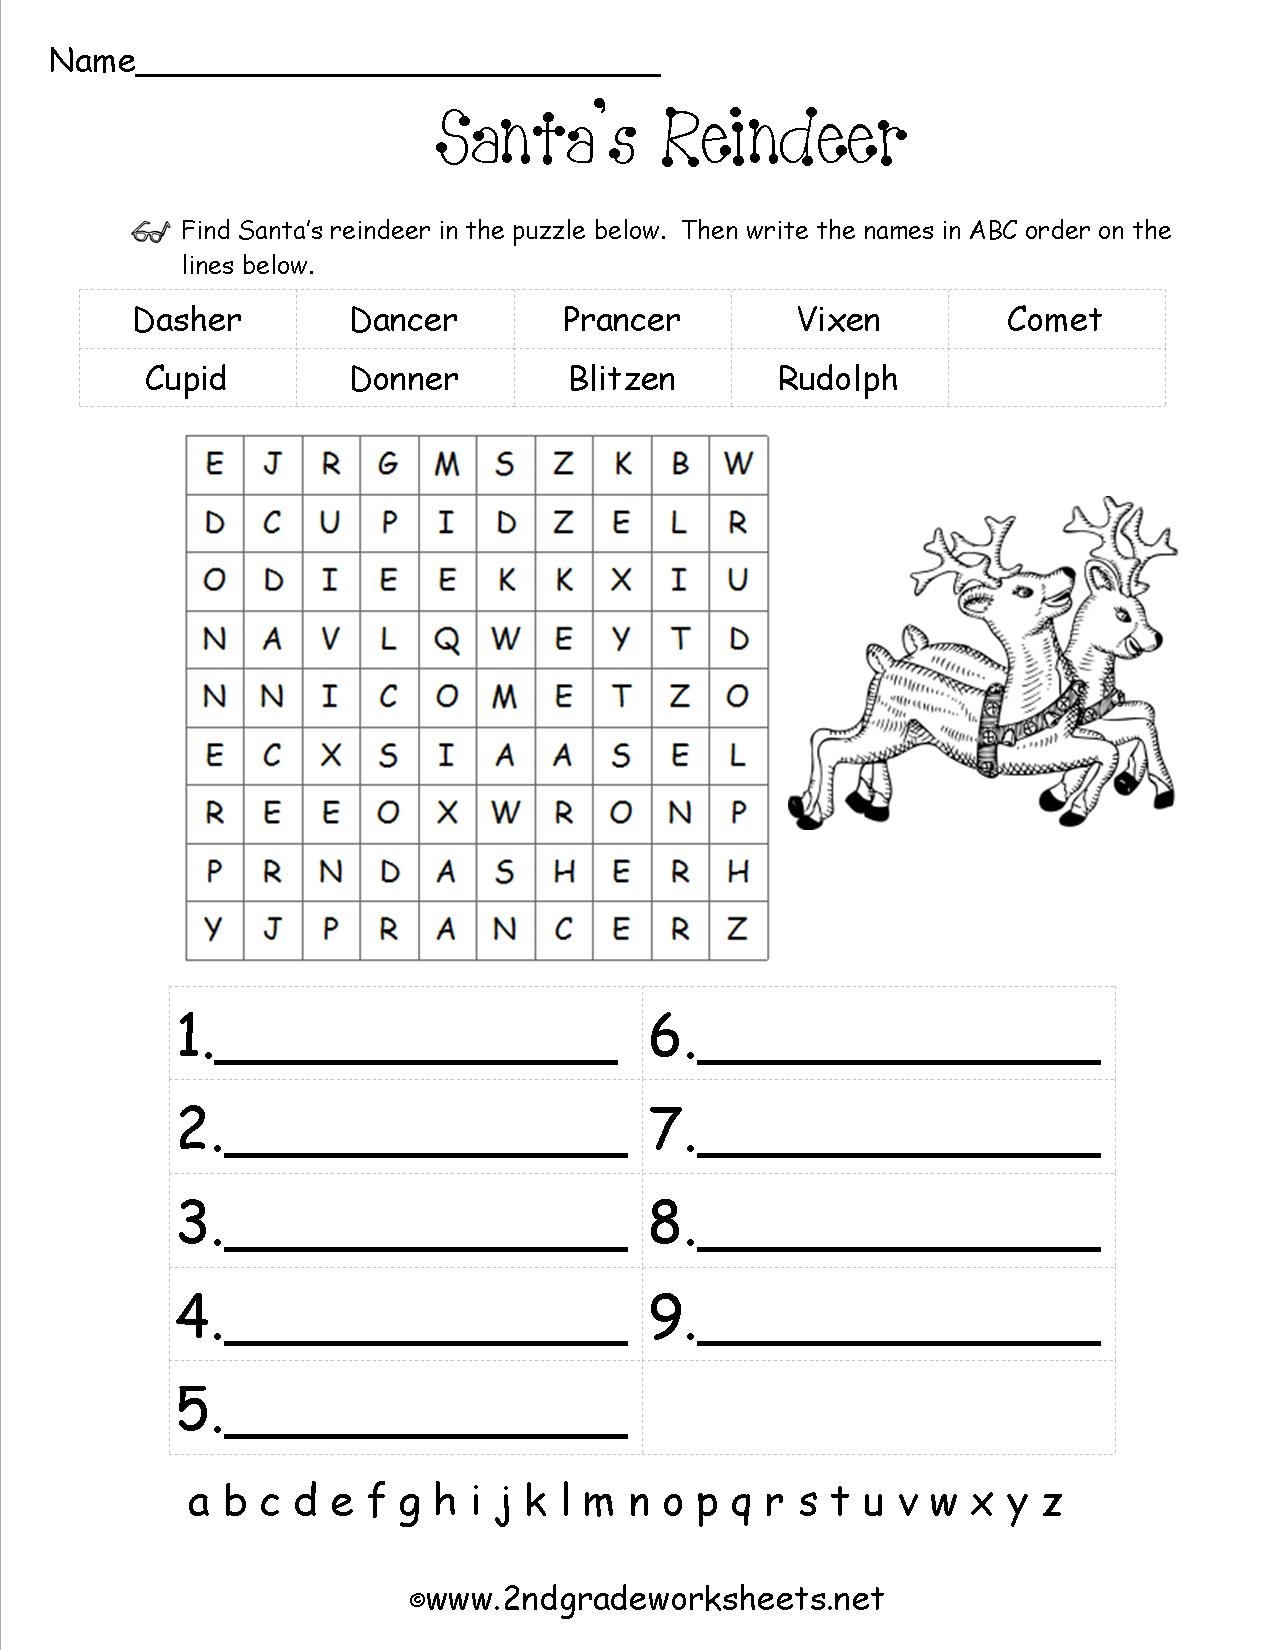 Christmas Worksheets And Printouts - Free Printable Christmas Worksheets